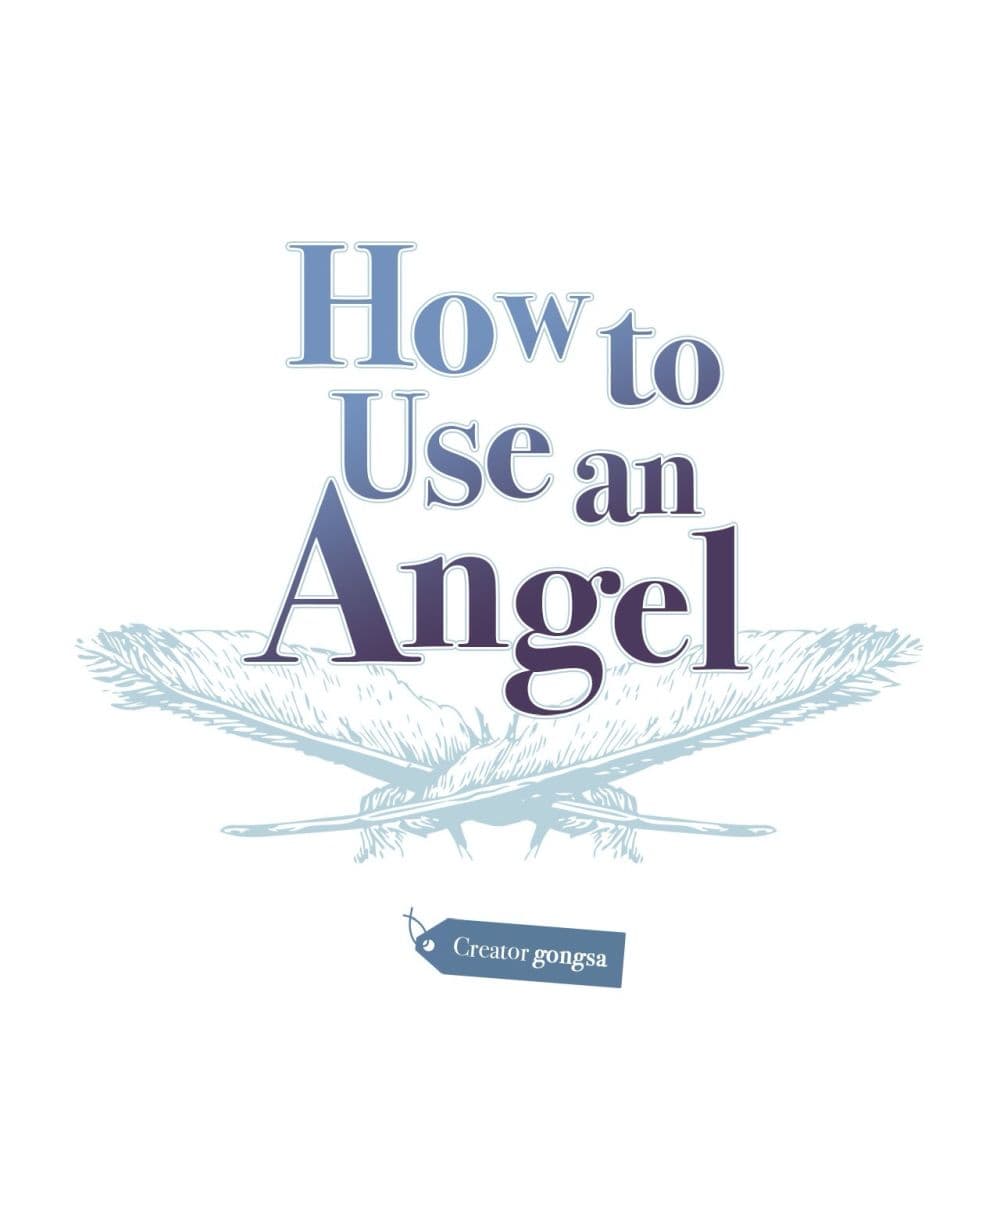 How to Use an Angel 9 (2)